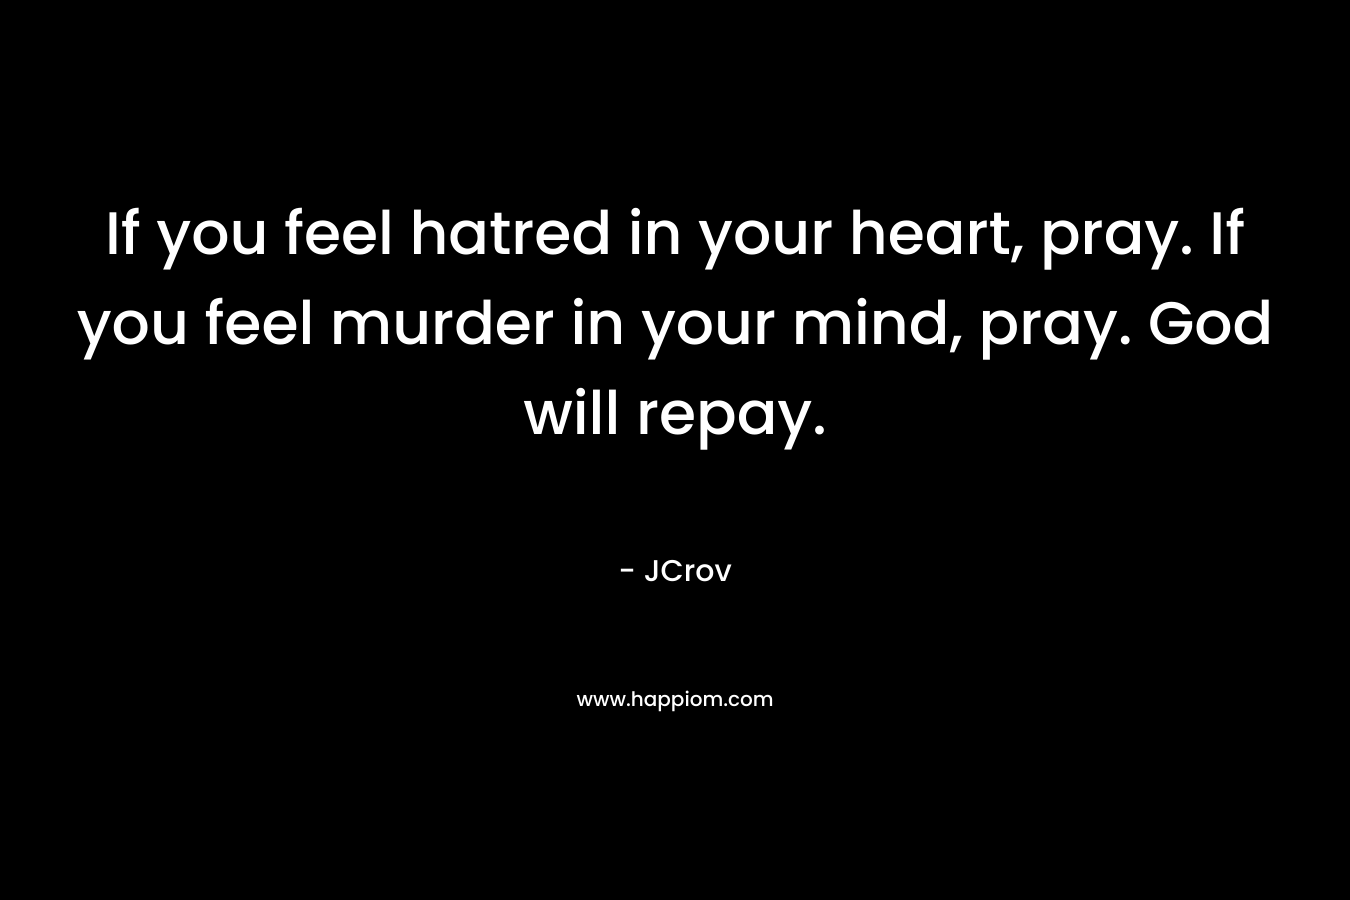 If you feel hatred in your heart, pray. If you feel murder in your mind, pray. God will repay. – JCrov